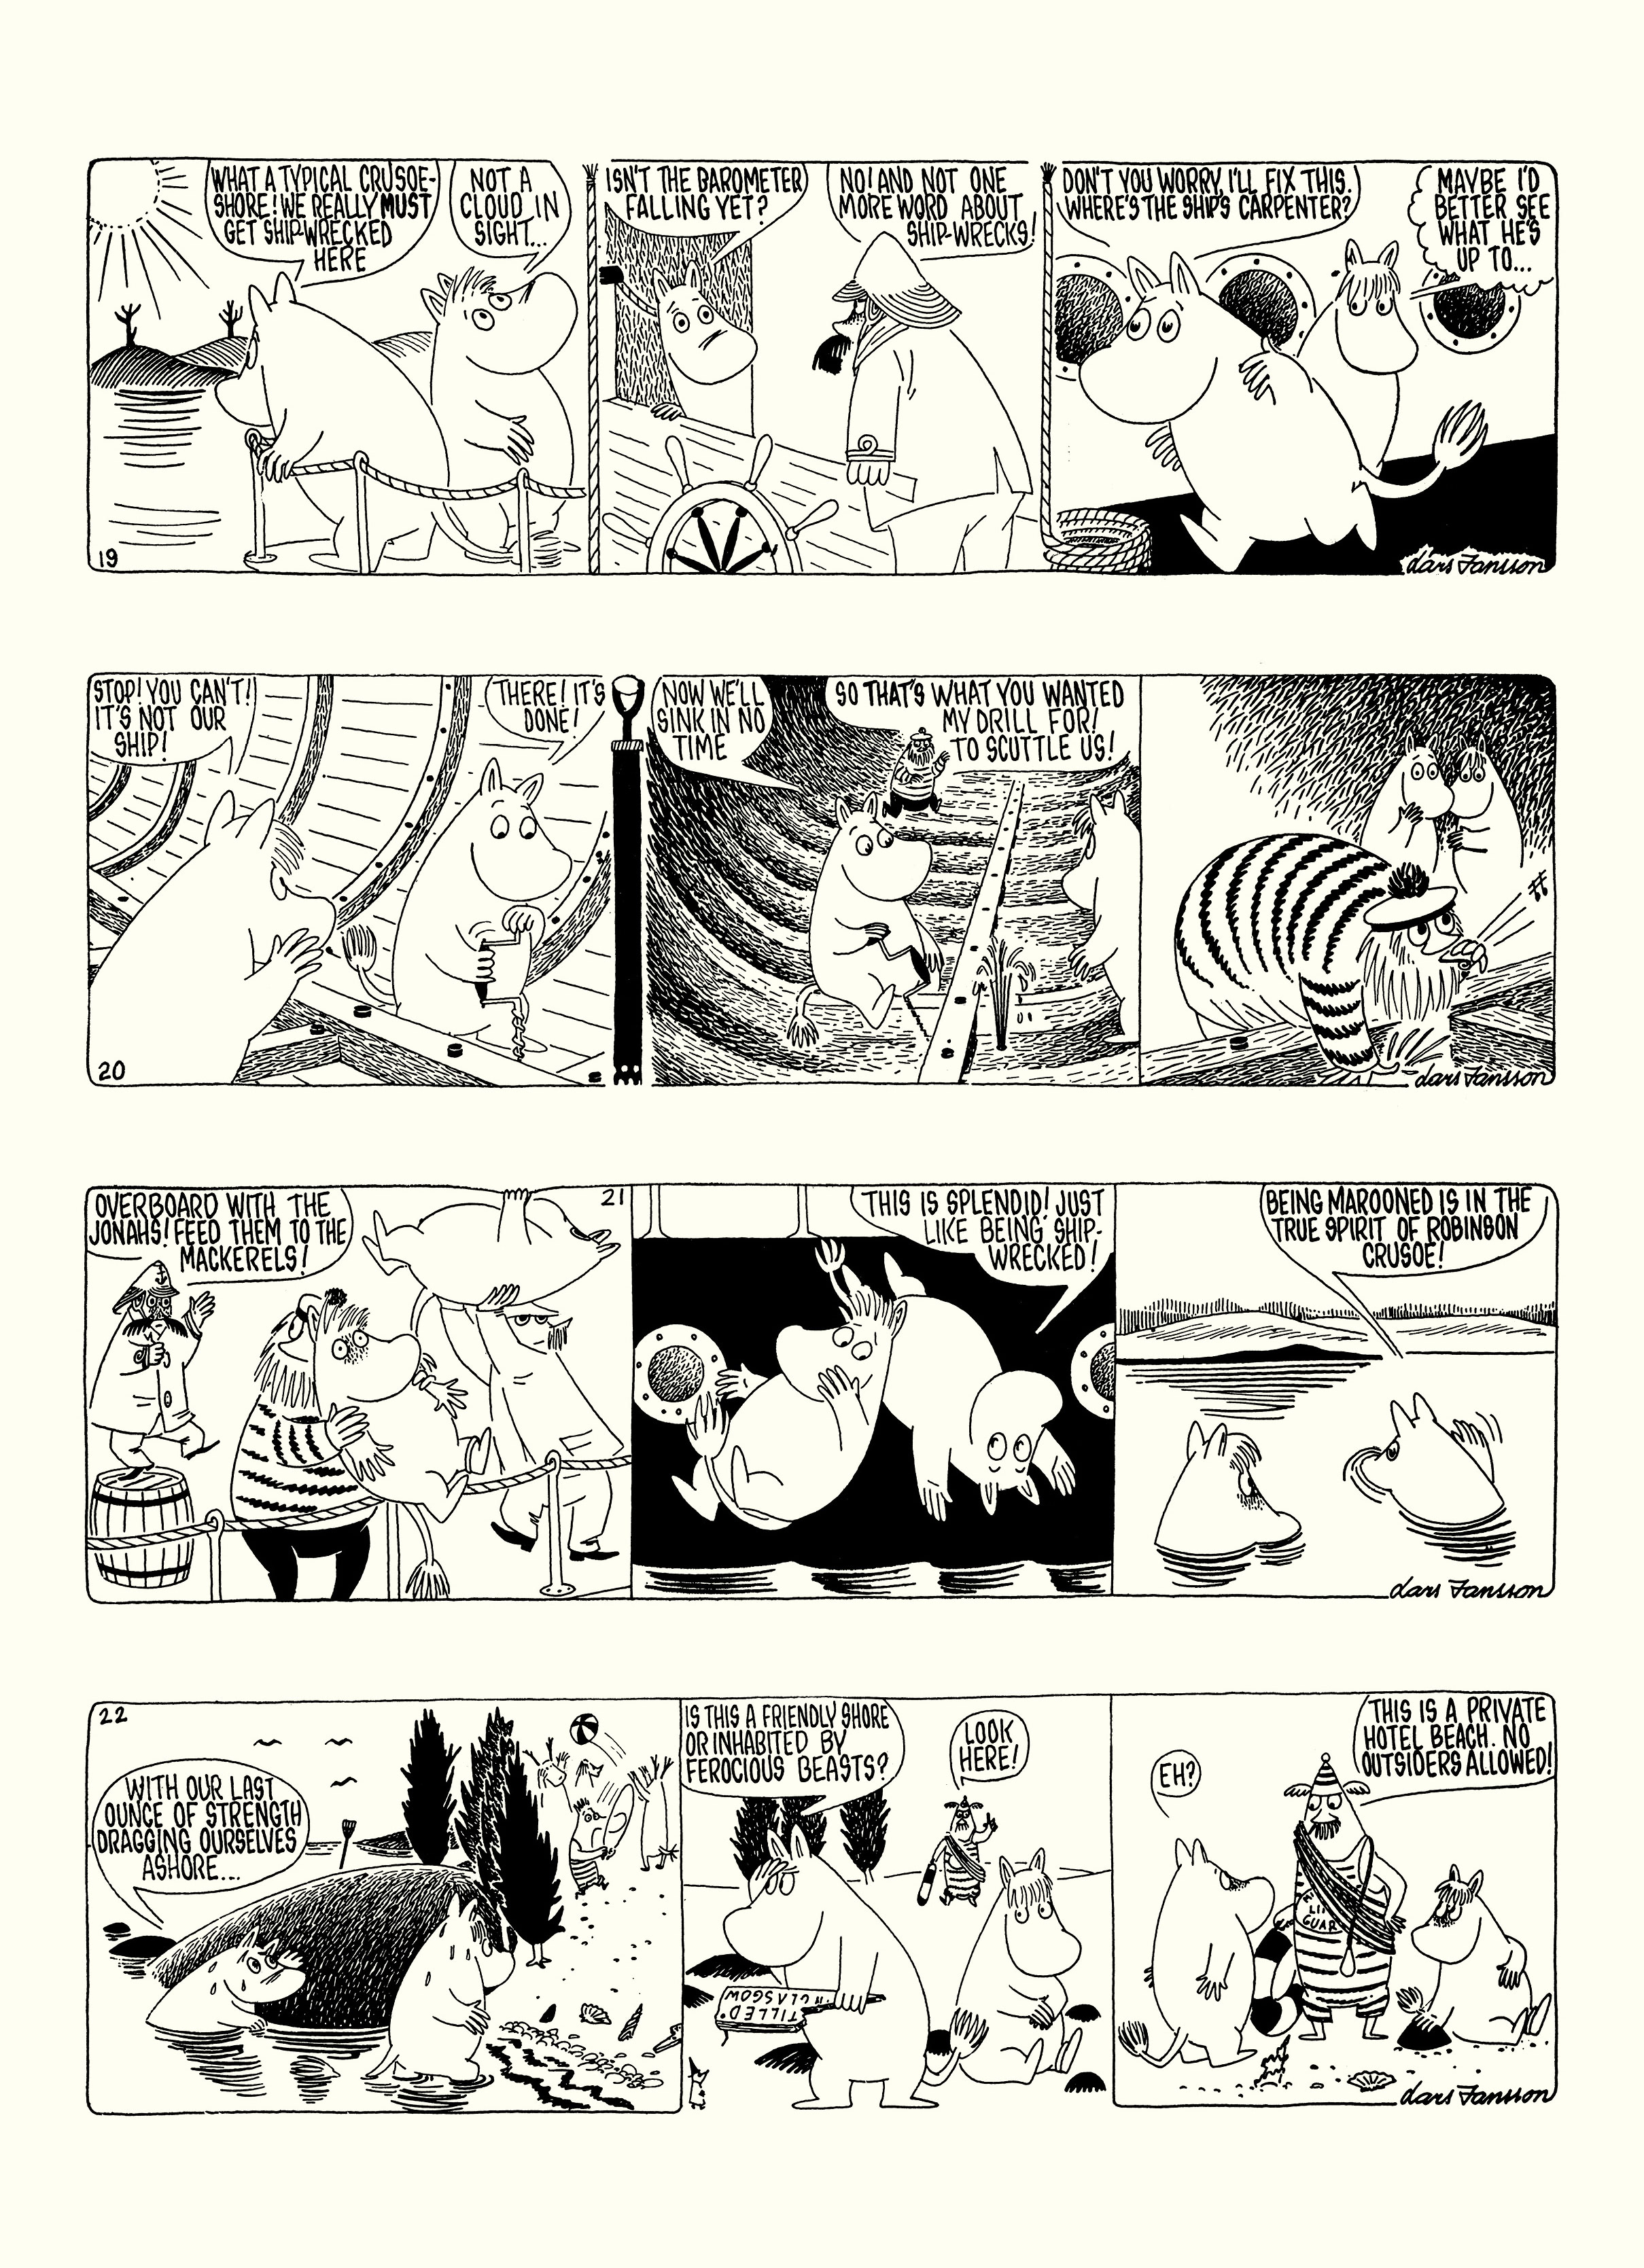 Read online Moomin: The Complete Lars Jansson Comic Strip comic -  Issue # TPB 8 - 10